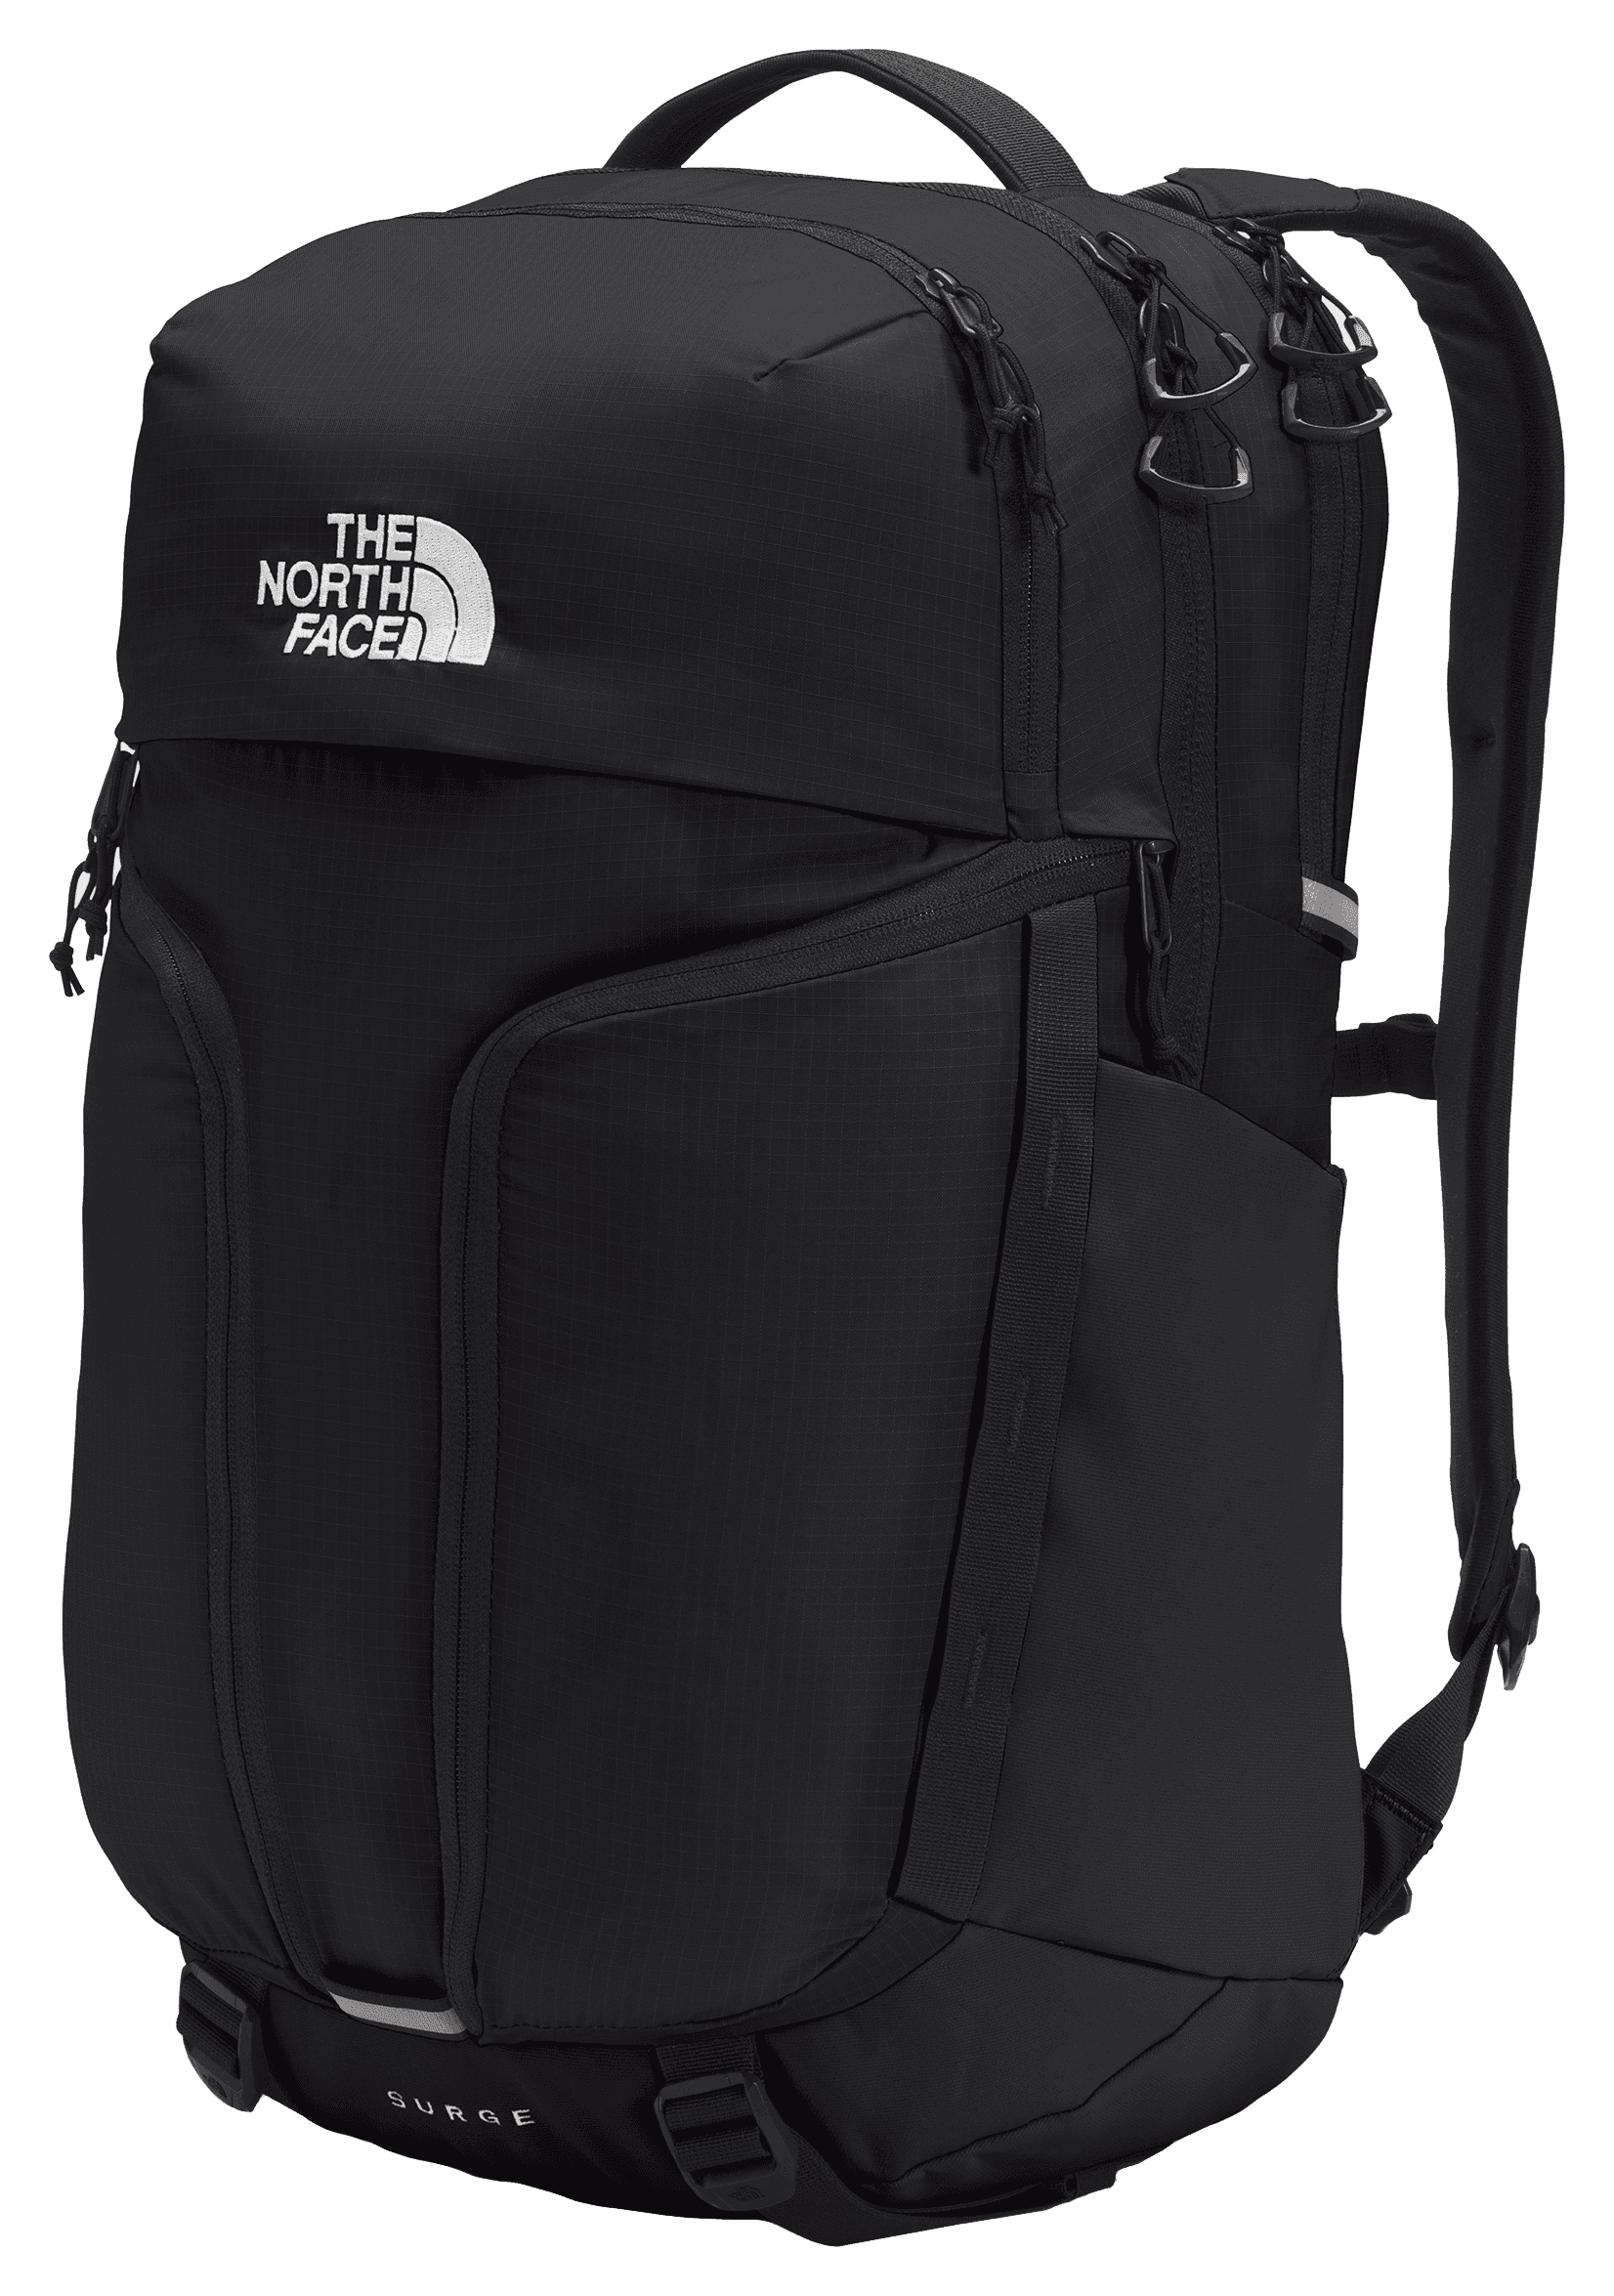 The North Face Surge 31L Backpack - TNF Black